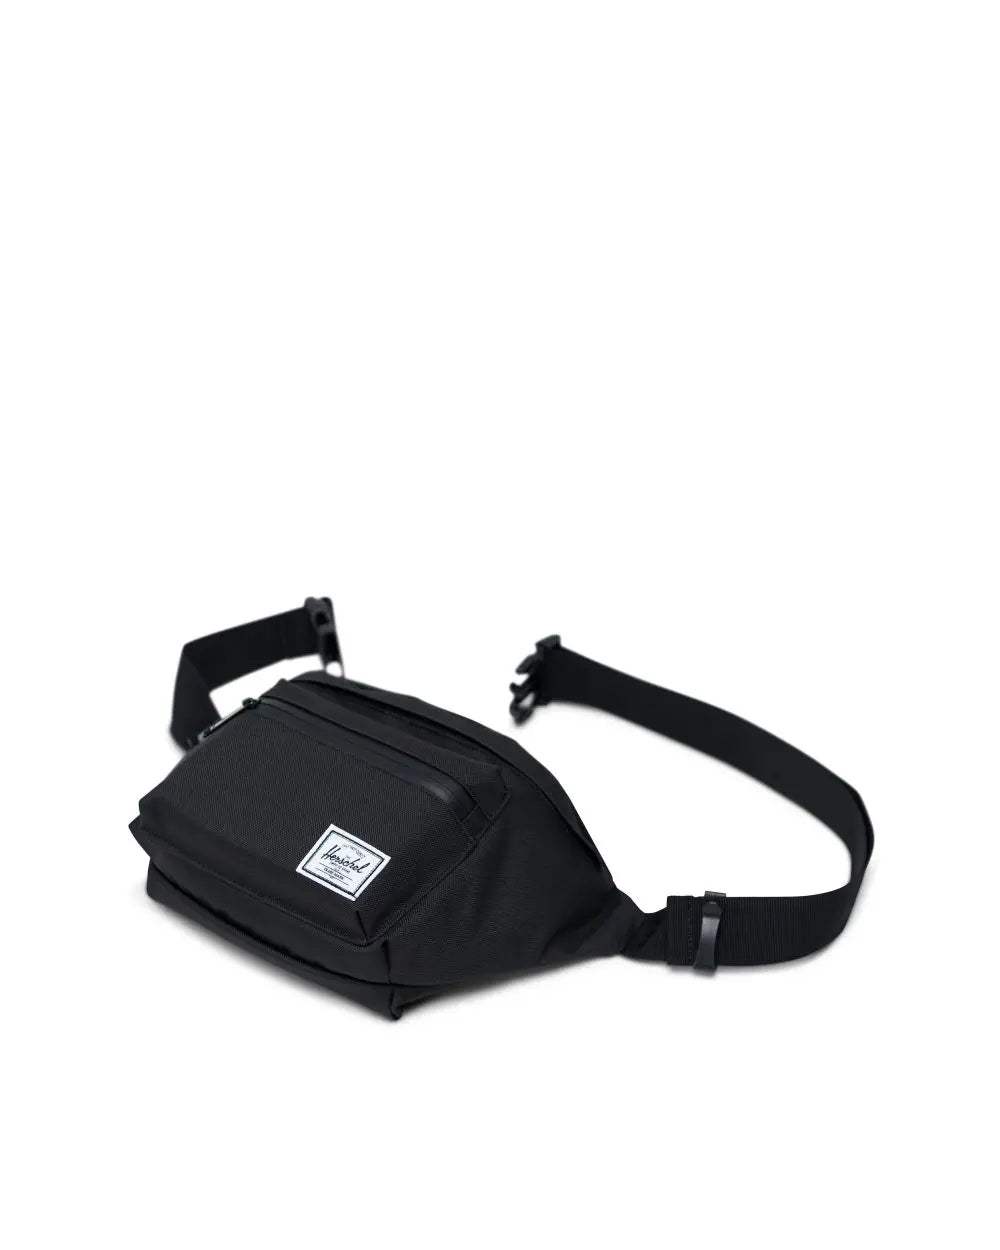 Herschel Seventeen Hip Pack - The Luxury Promotional Gifts Company Limited